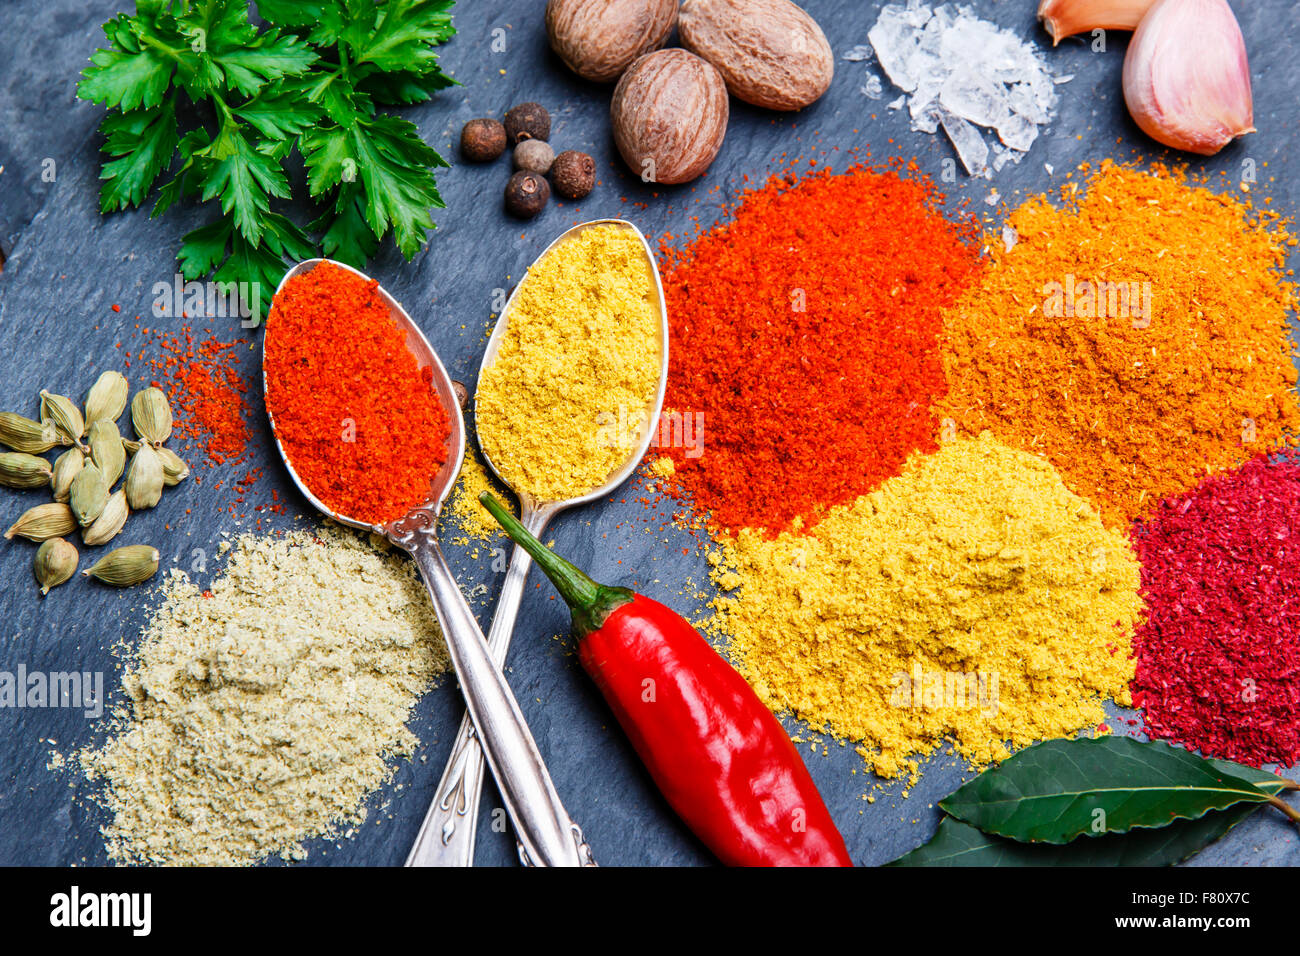 assortment of spices seasoning on a black stone Stock Photo